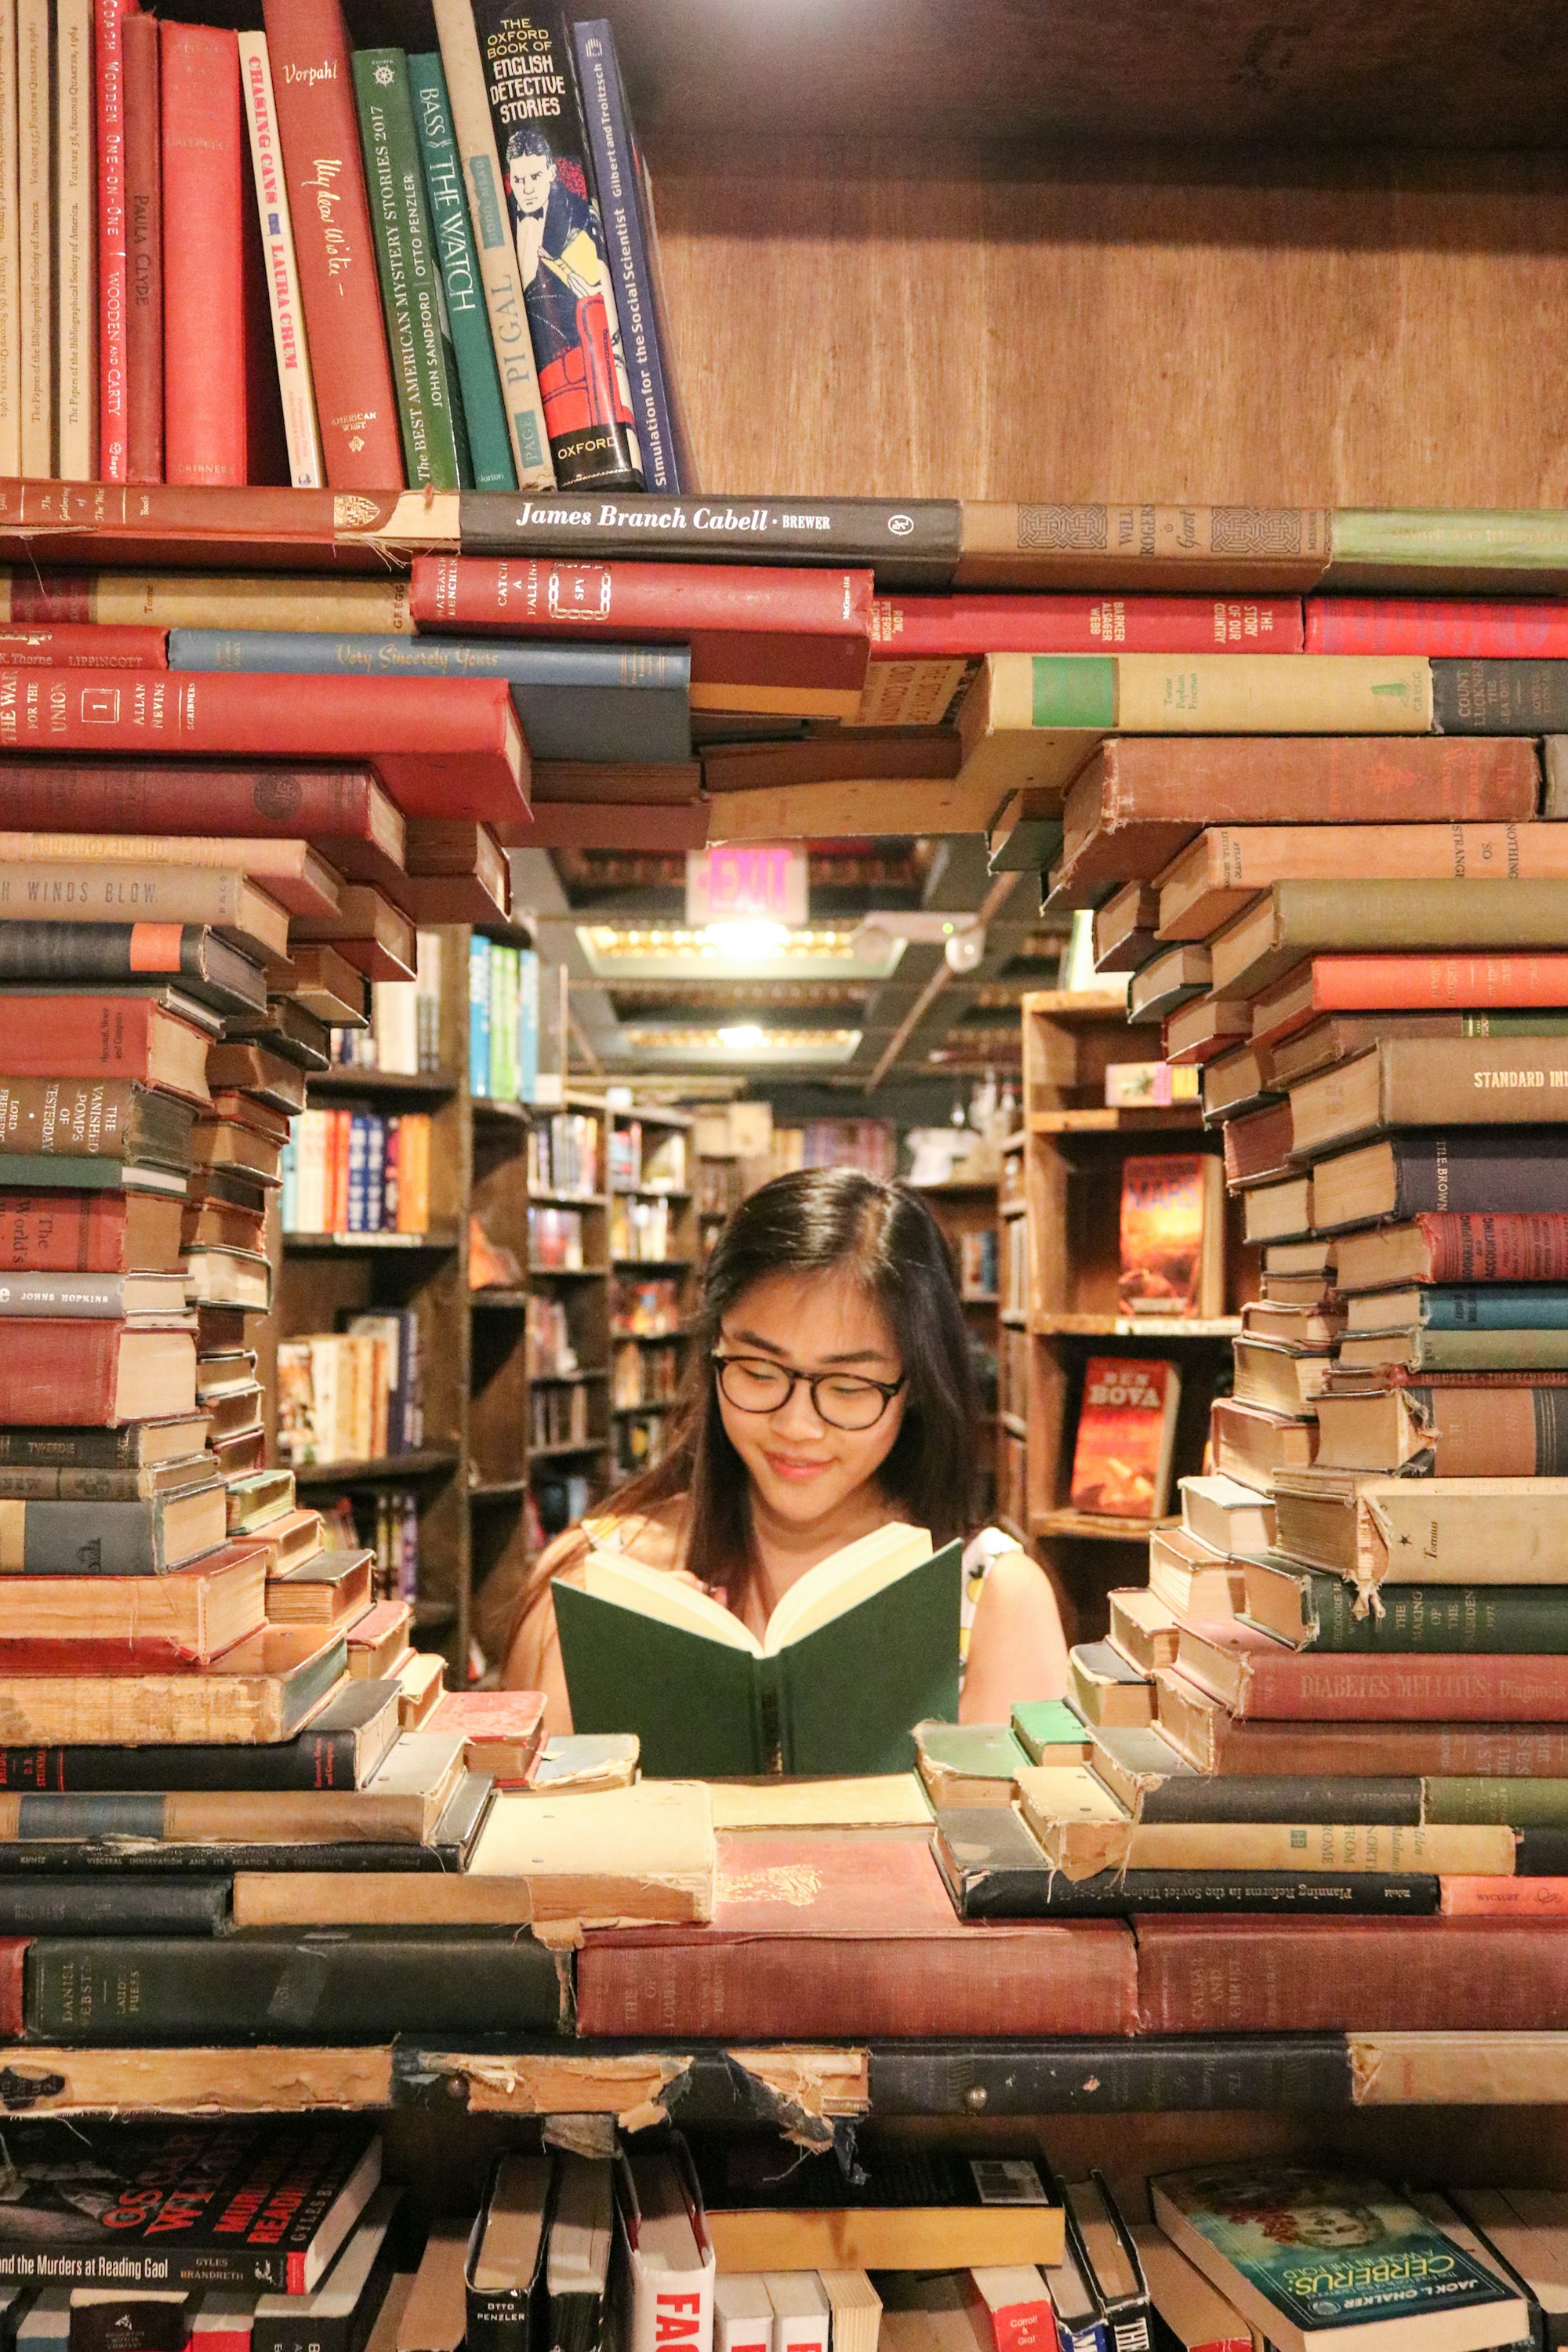 The Last Bookstore 📚
Model: Ying Ge